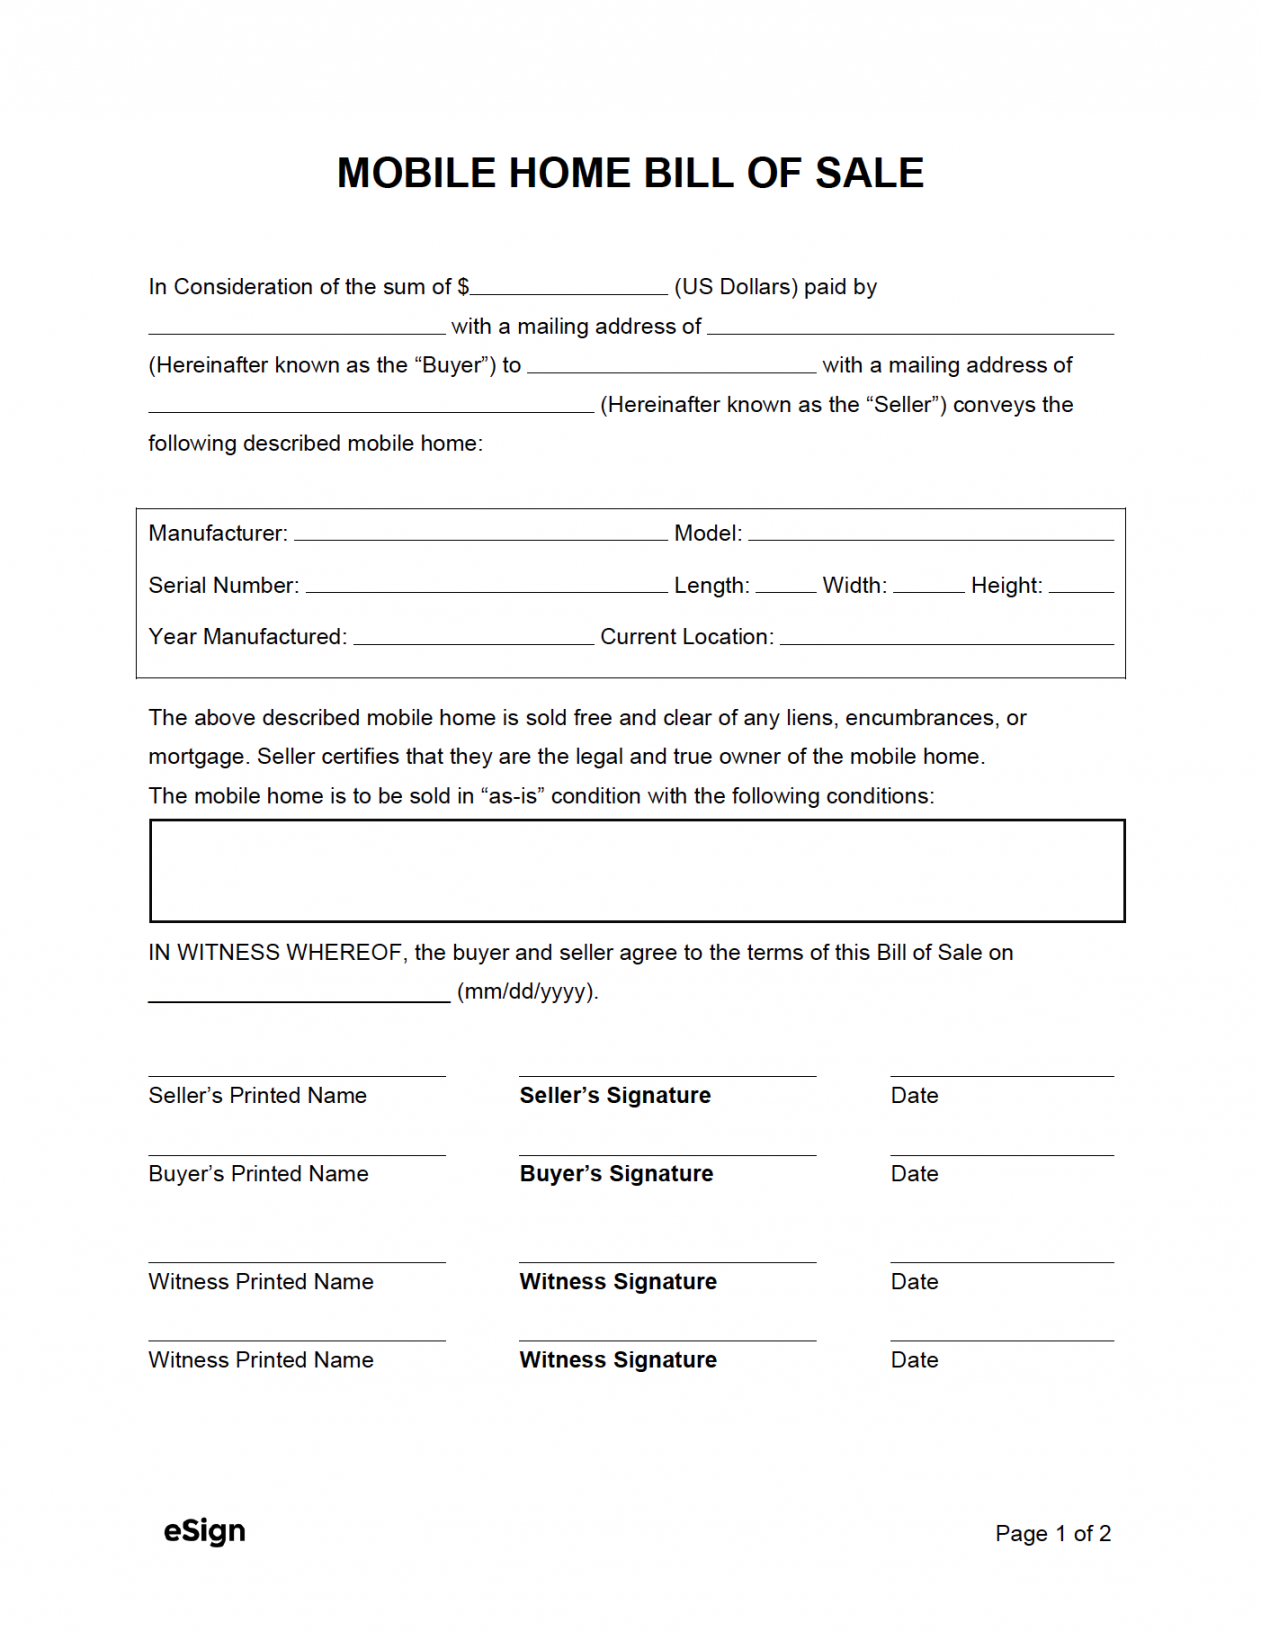 Free Mobile Home Bill of Sale Form  PDF  Word - FREE Printables - Free Printable Bill Of Sale For Mobile Home